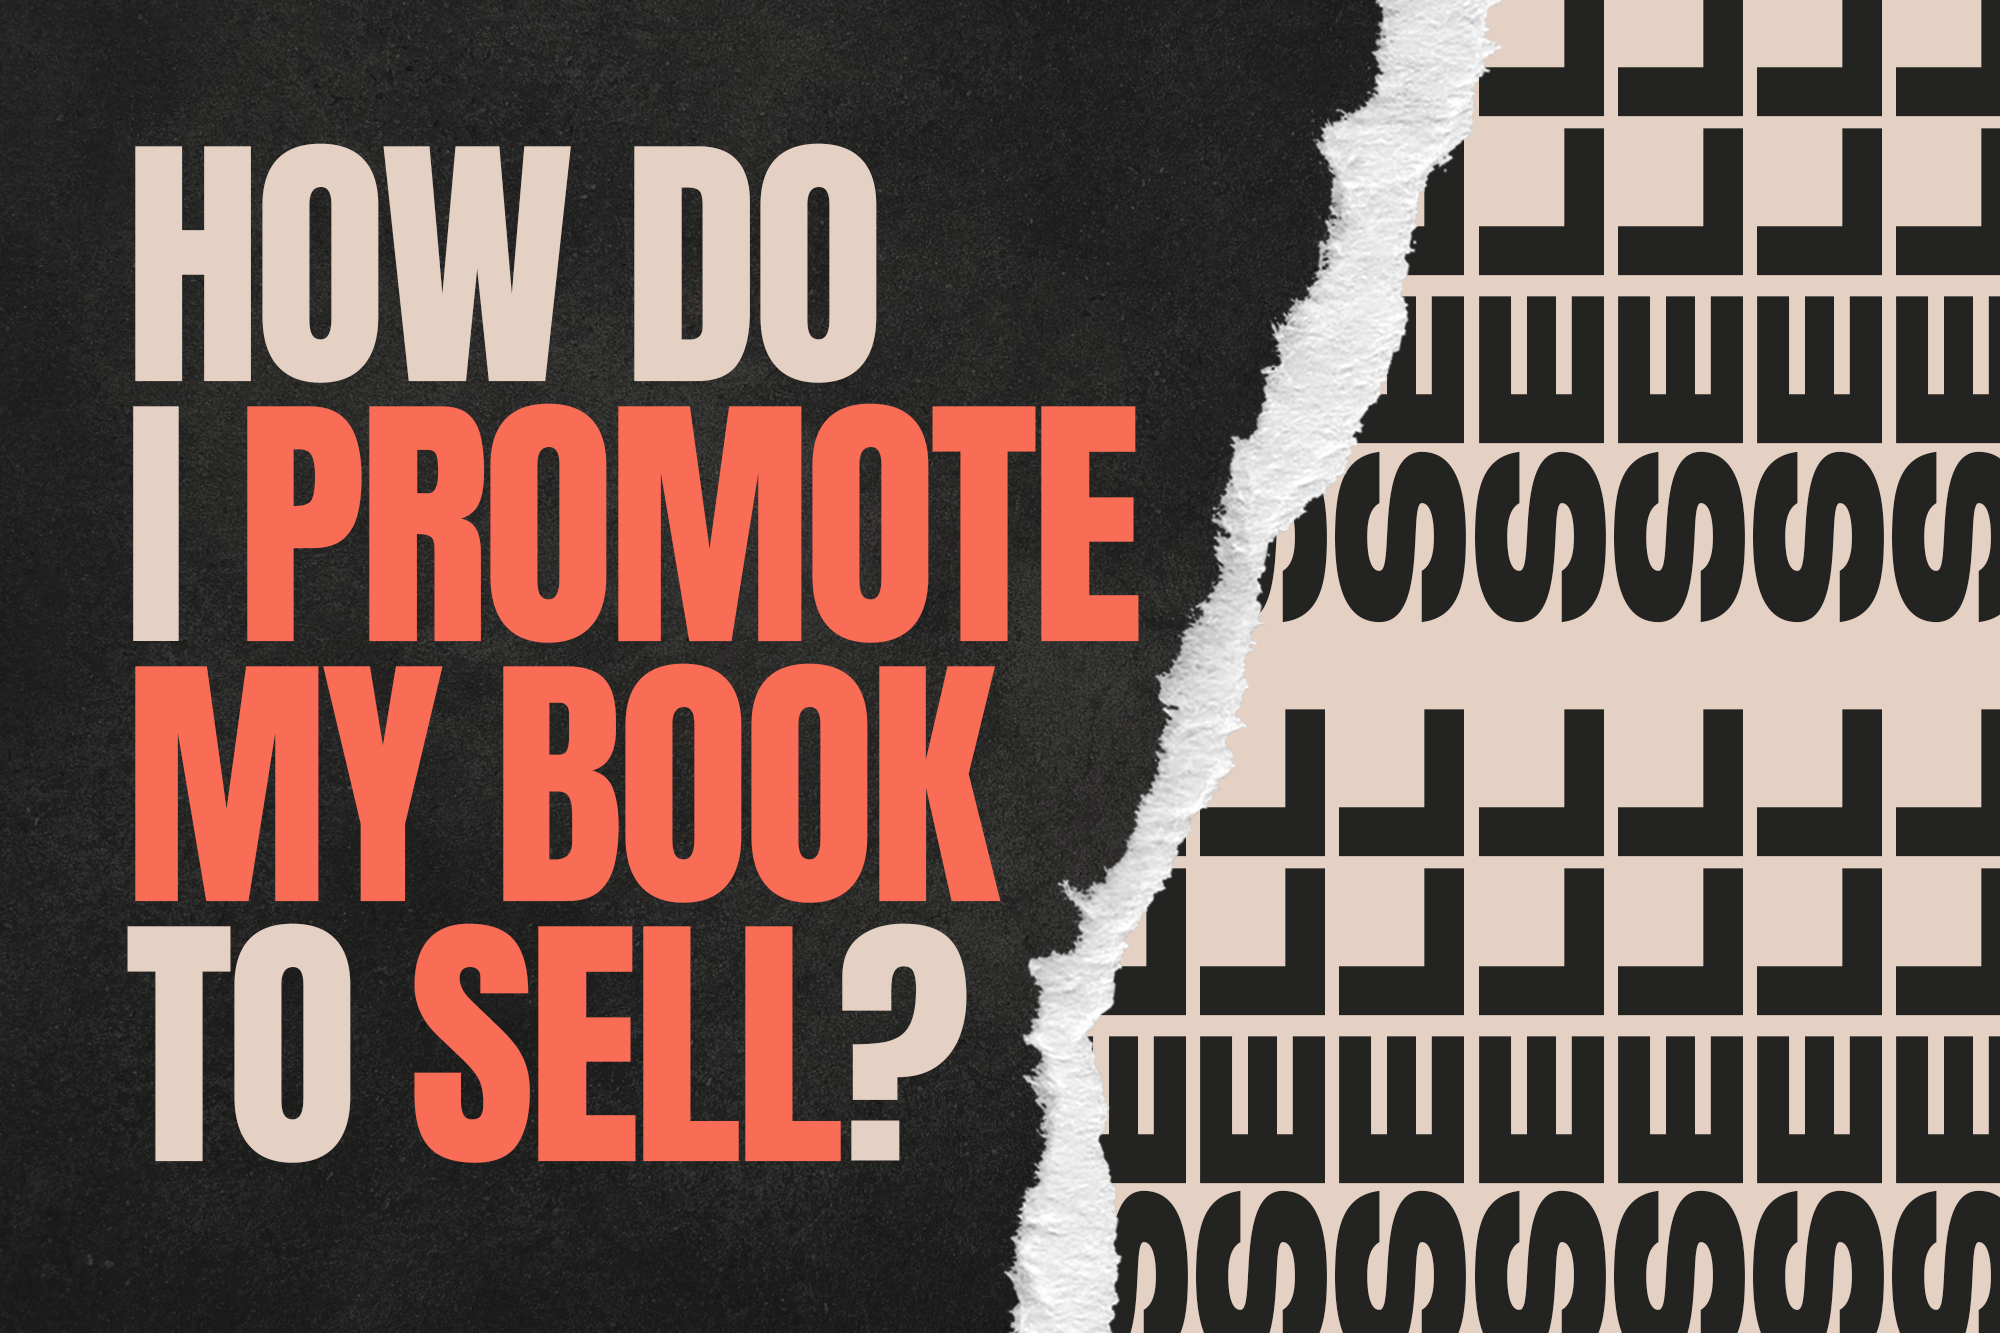 How do I promote my book to sell